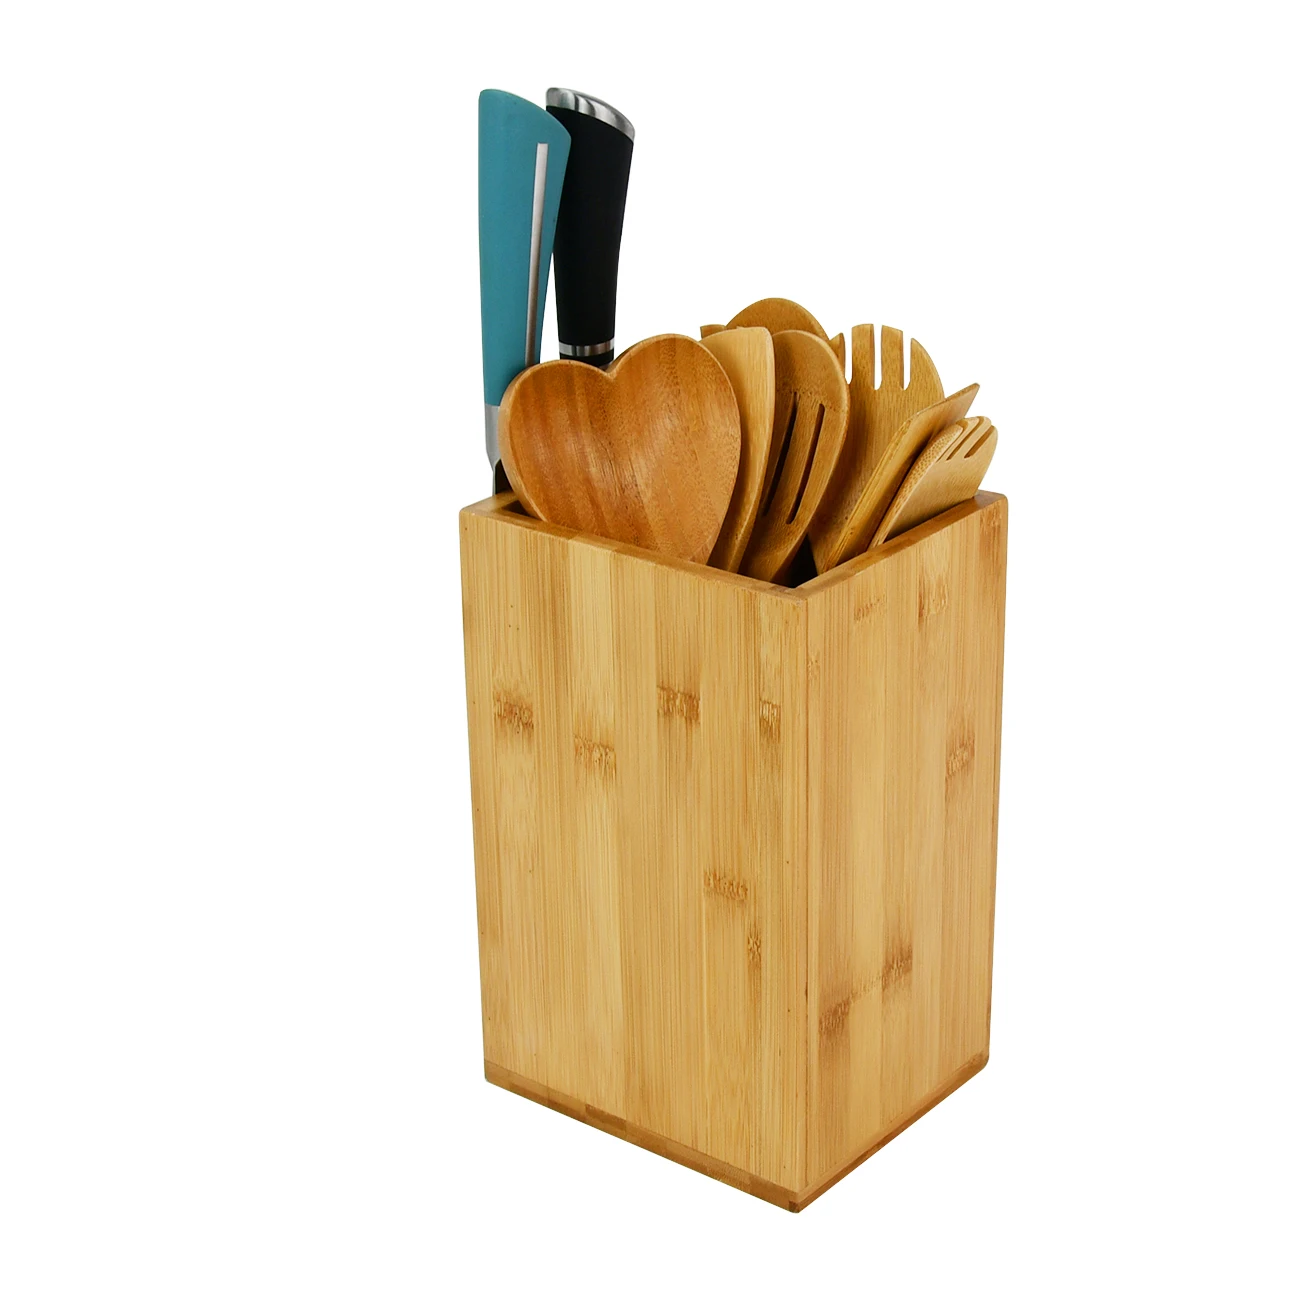 2 in 1 Kitchen Bamboo Countertop Holders Utensil Caddy with Magnetic Knife Holder for Counter Top Storage